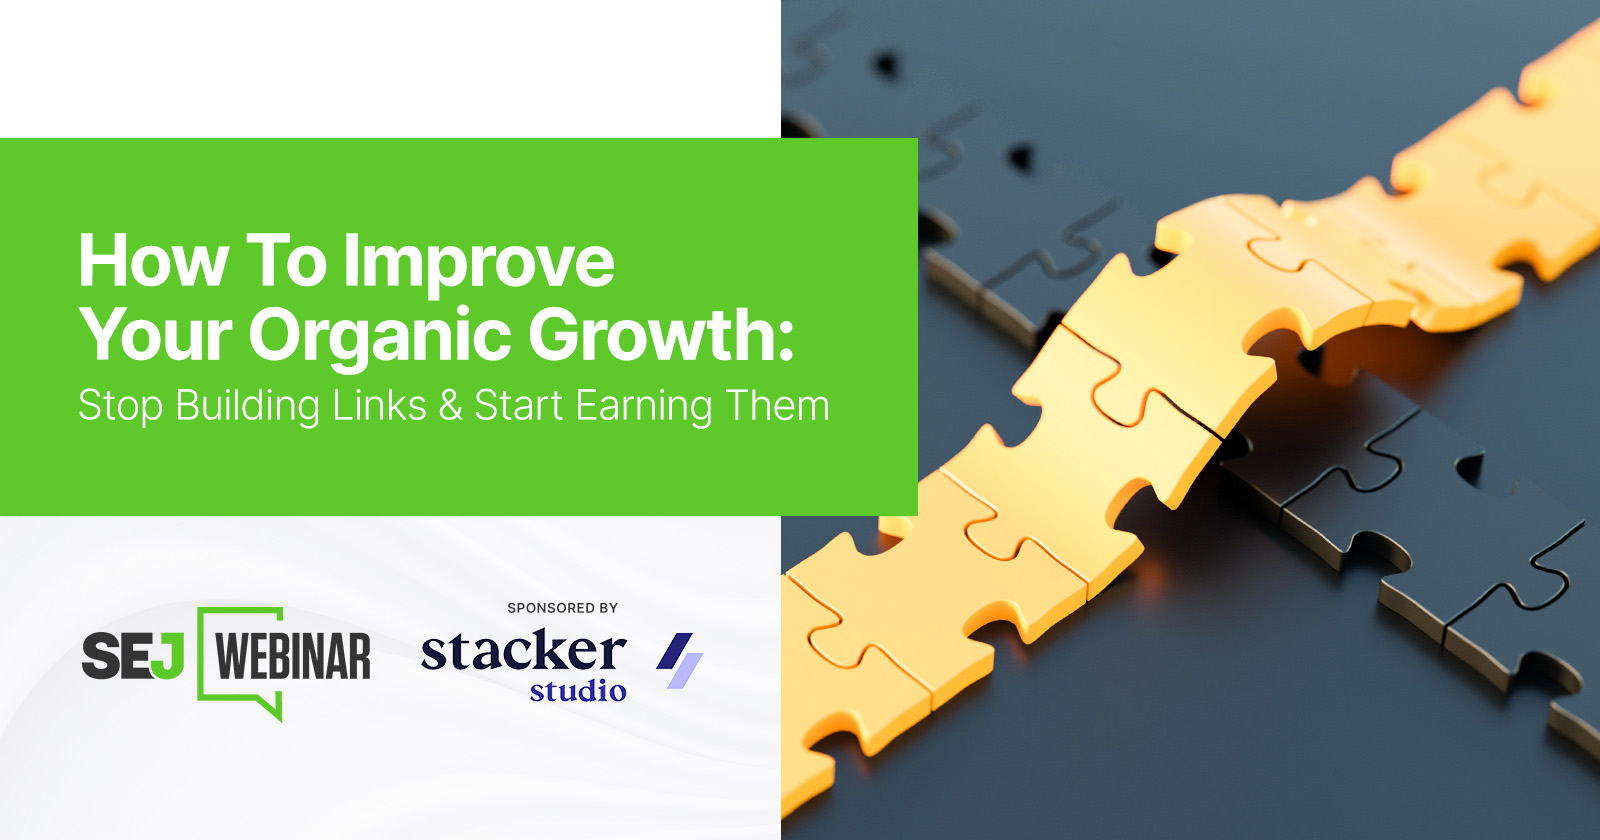 How To Improve Organic Growth: Don’t Build, But Earn Links [Webinar]